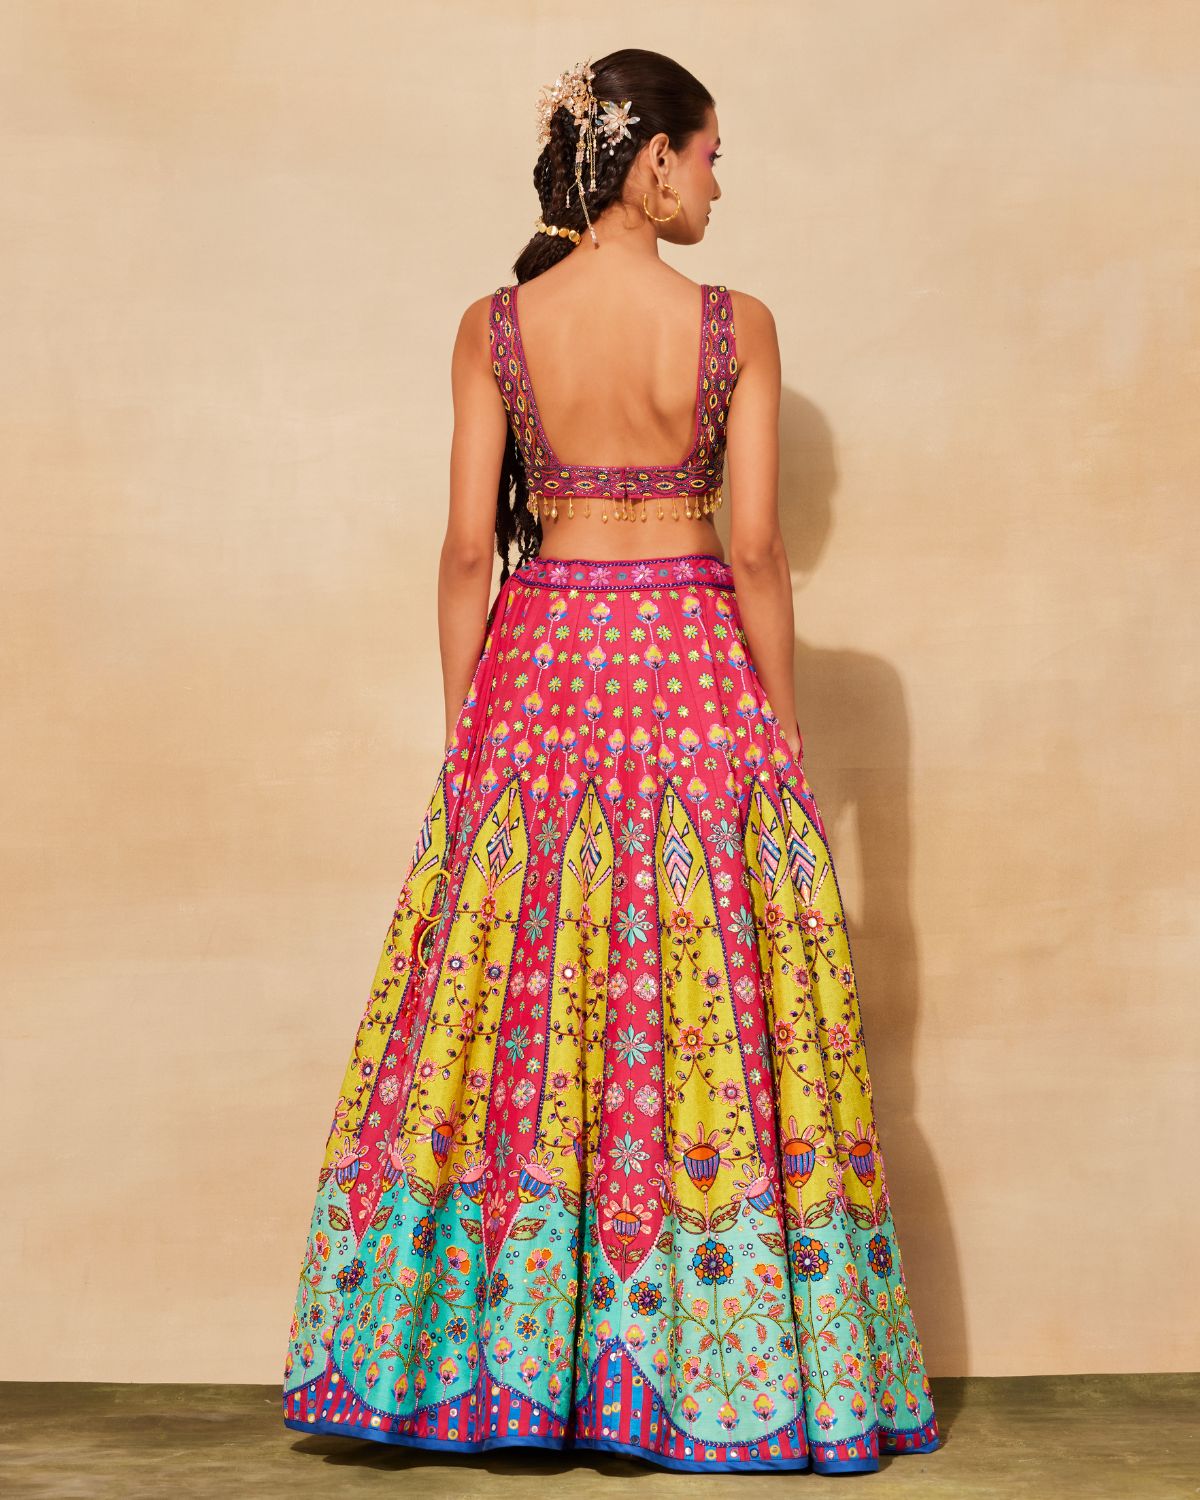 Choosing Lehenga Colours and Fabrics - A Step-by-Step Guide